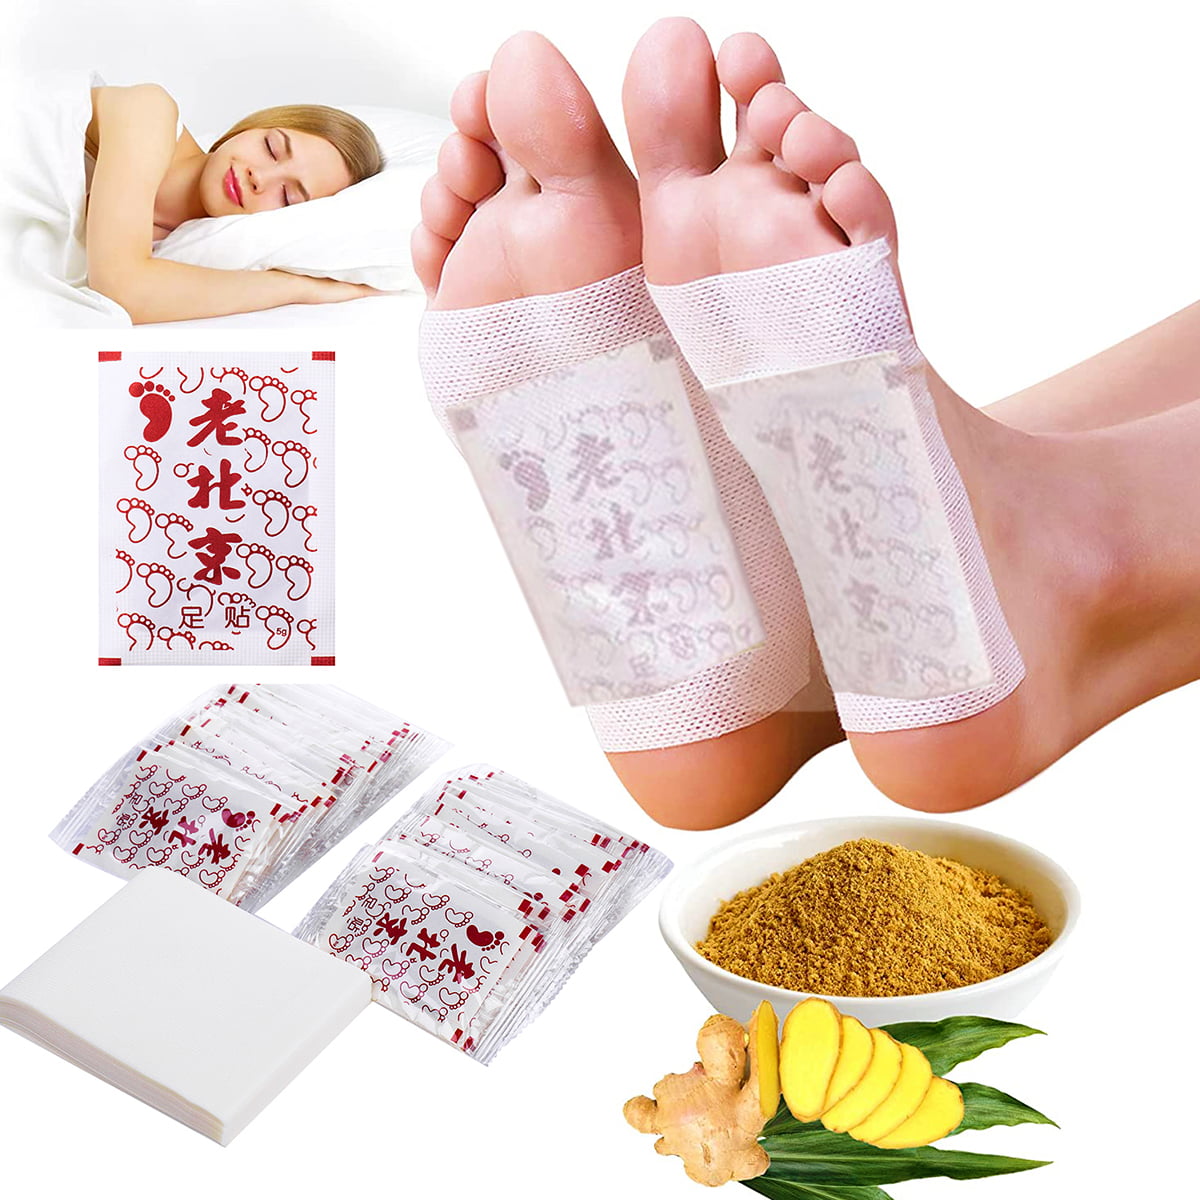 Anti-Inflammation/Swelling Ginger Foot Patch 